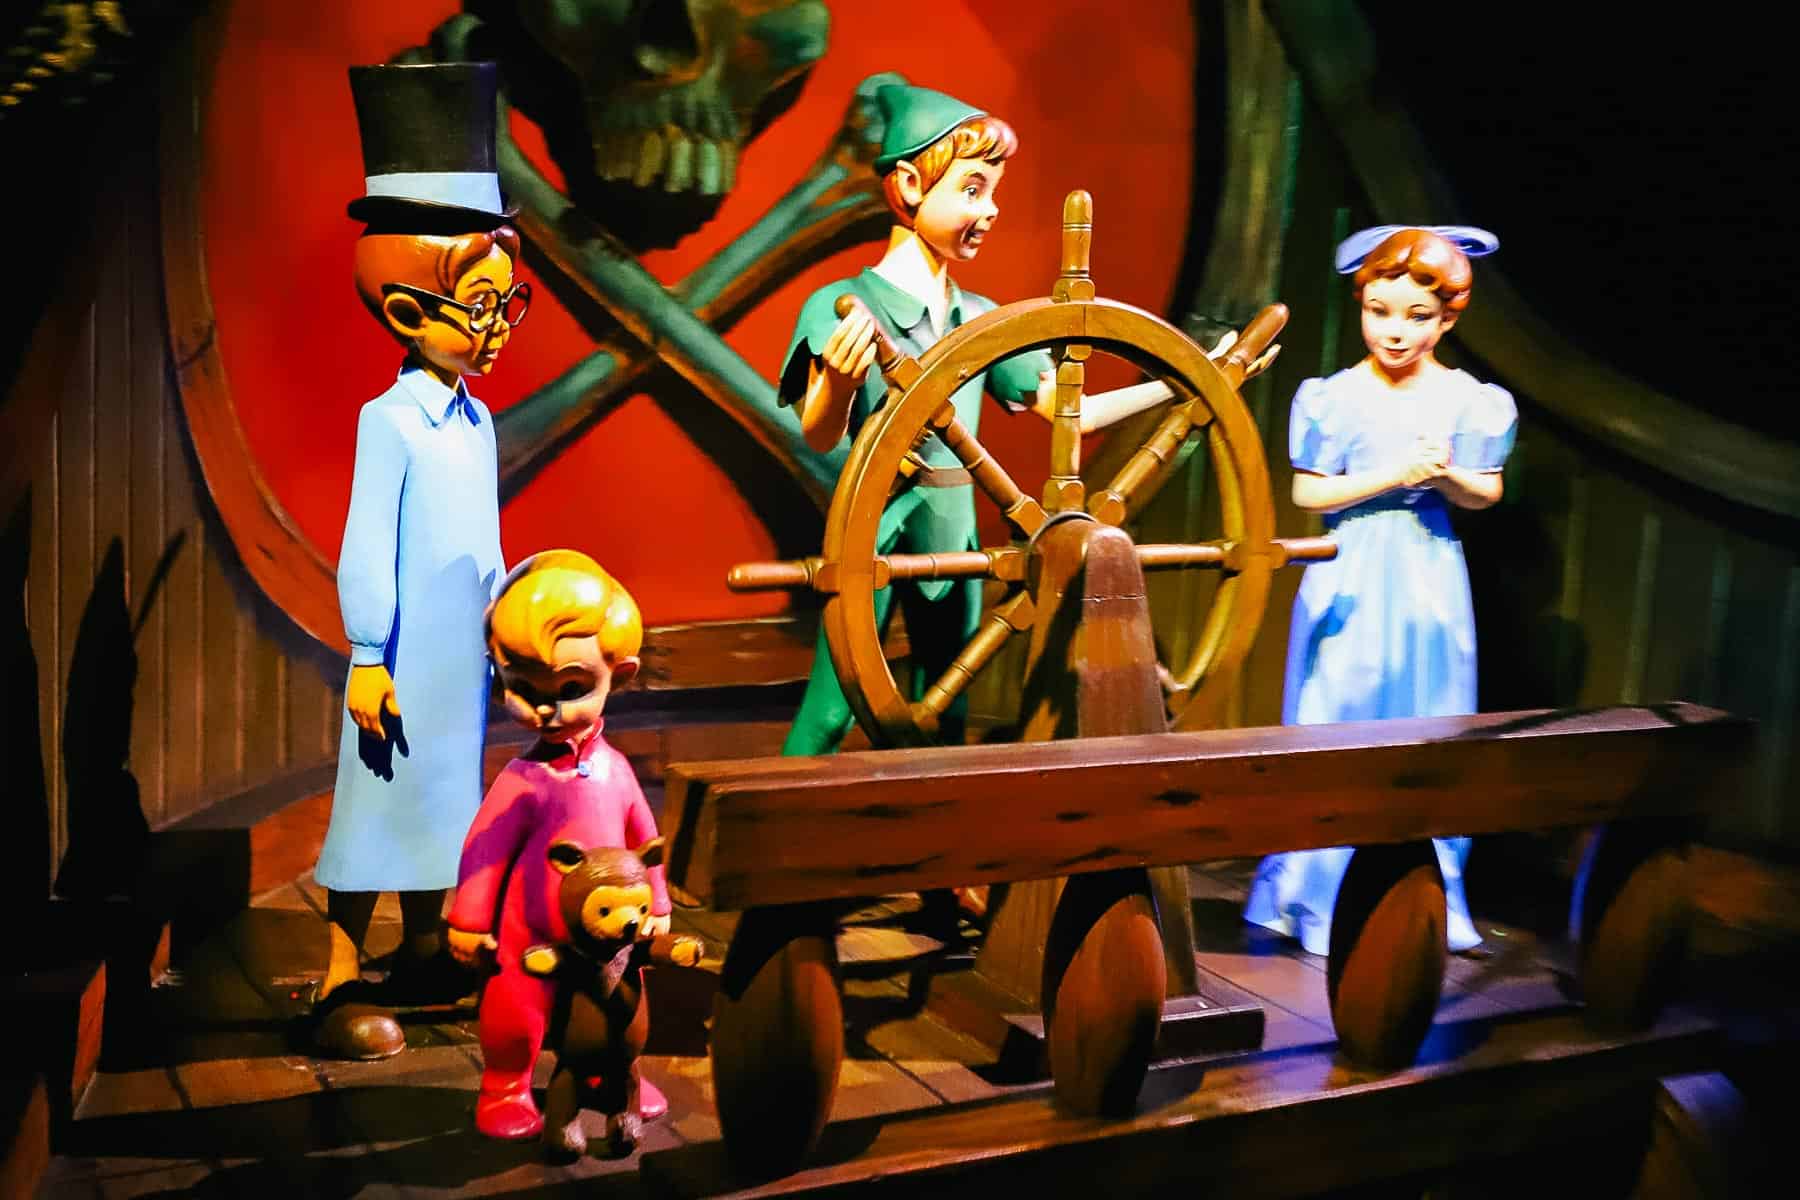 Ride Scene at the end of Peter Pan's Flight